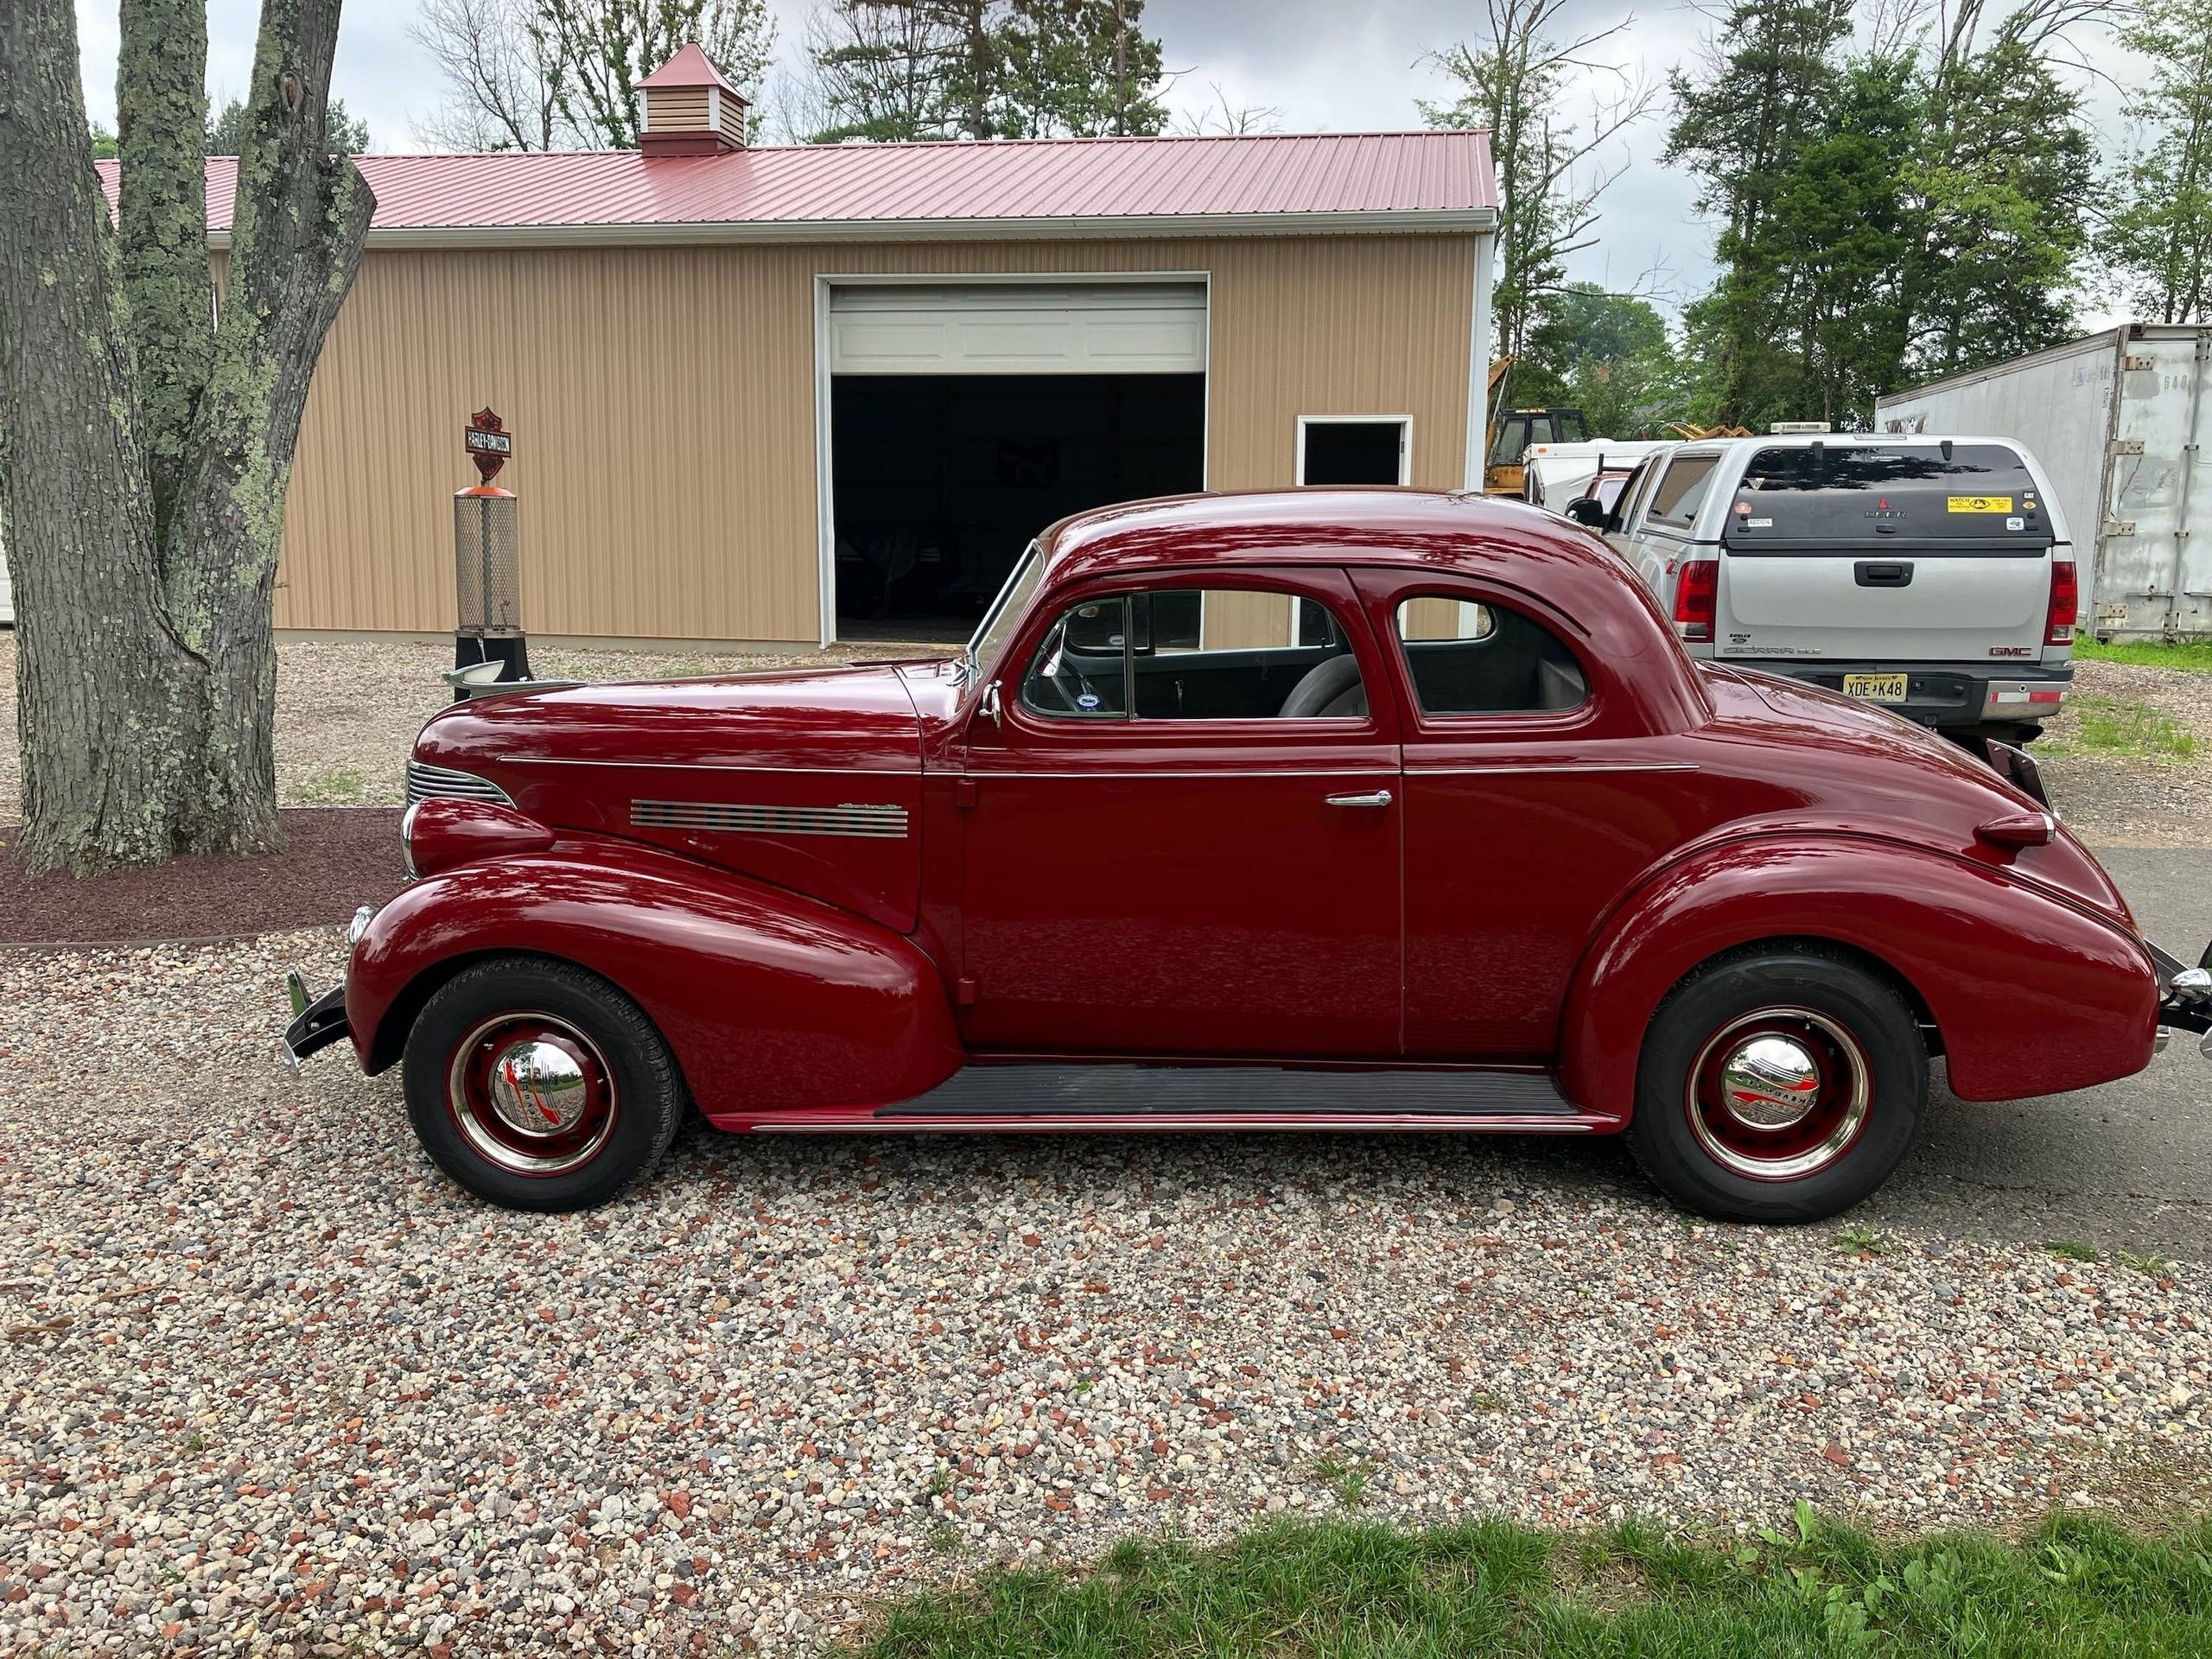 1939 Chevrolet Master 85 business coupe 4